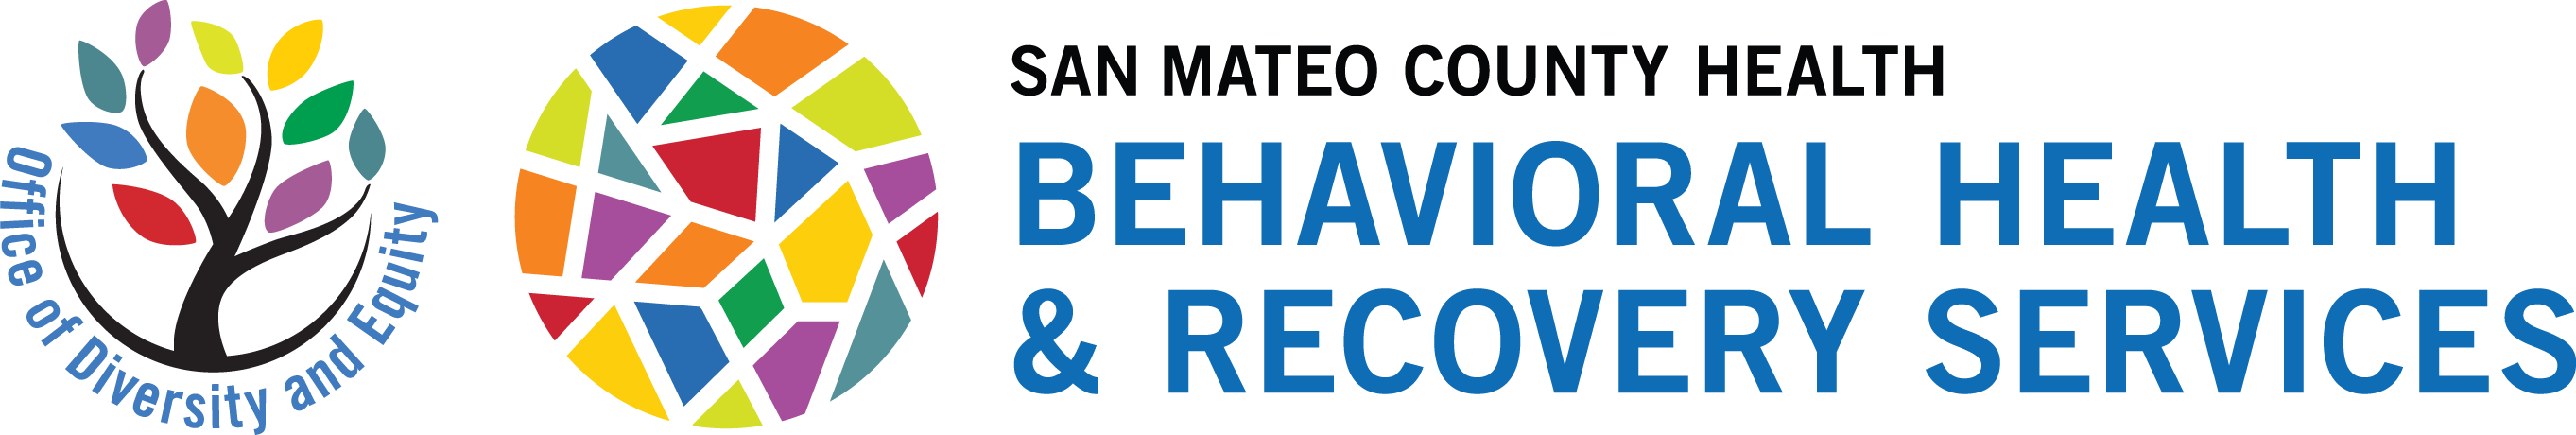 Behavioral Health & Recovery Services Logo Color